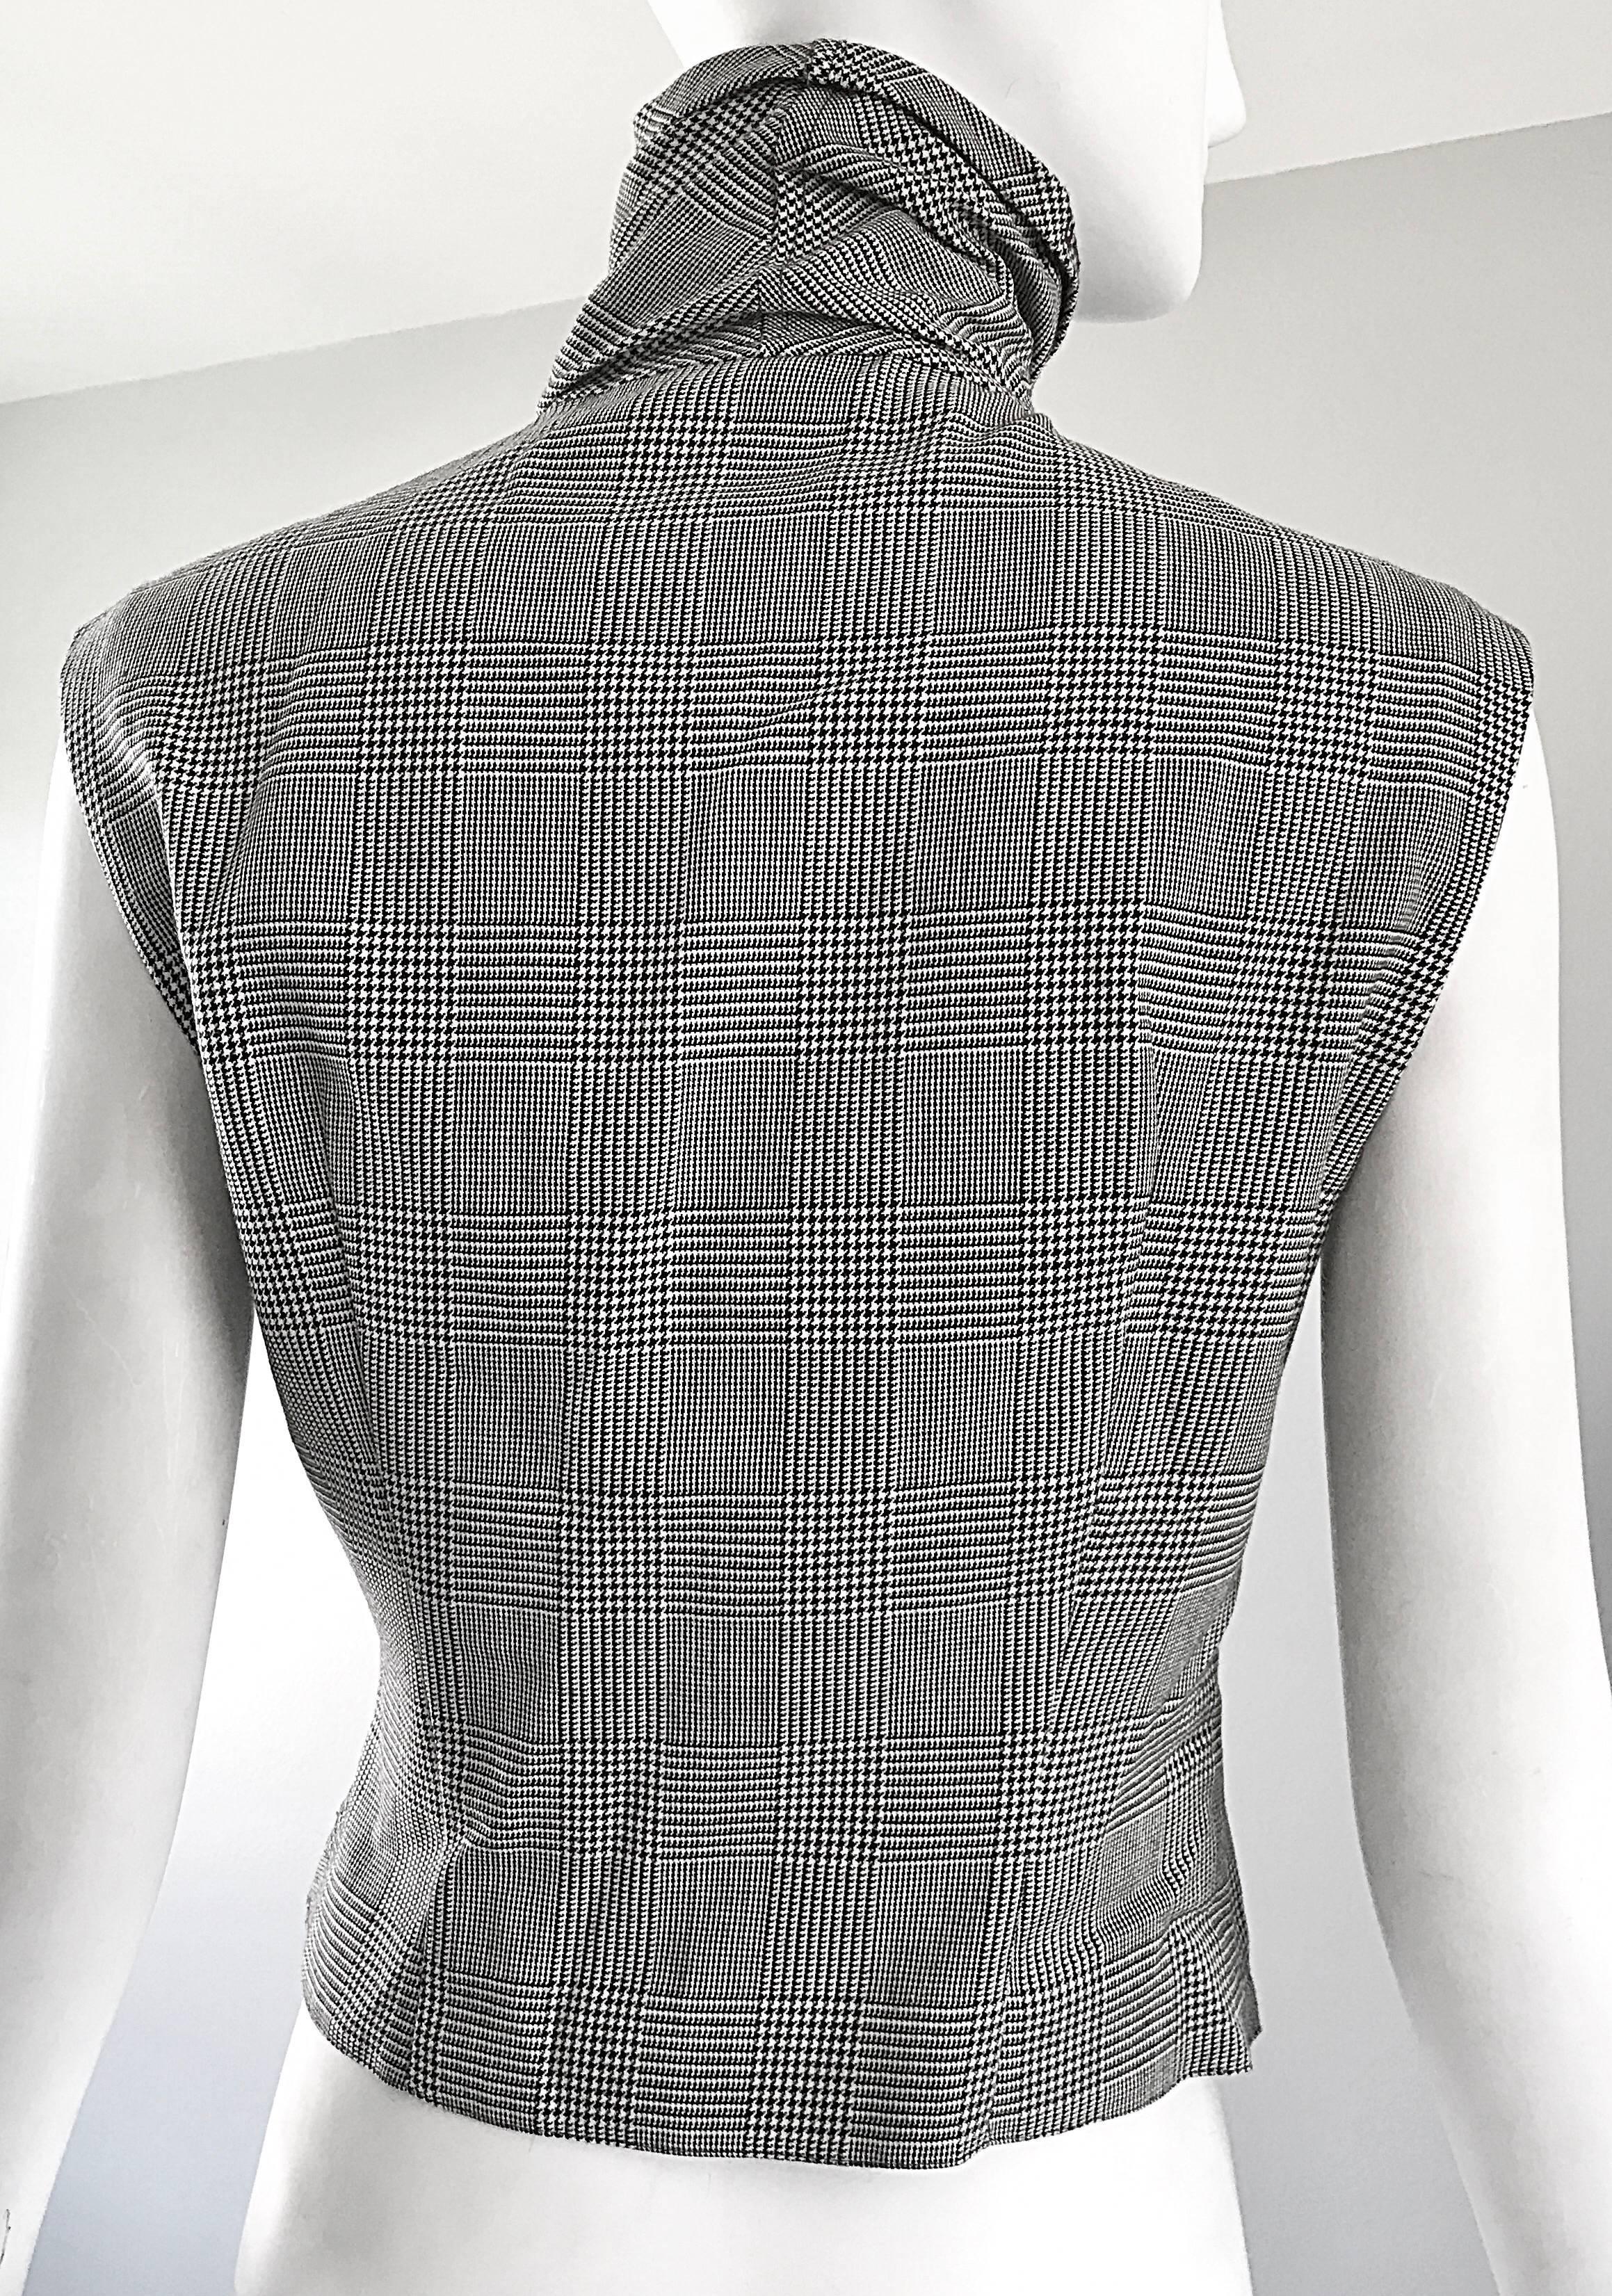 Women's Rare Early Gianni Versace Black and White Houndstooth Plaid Embroidered Vest Top For Sale